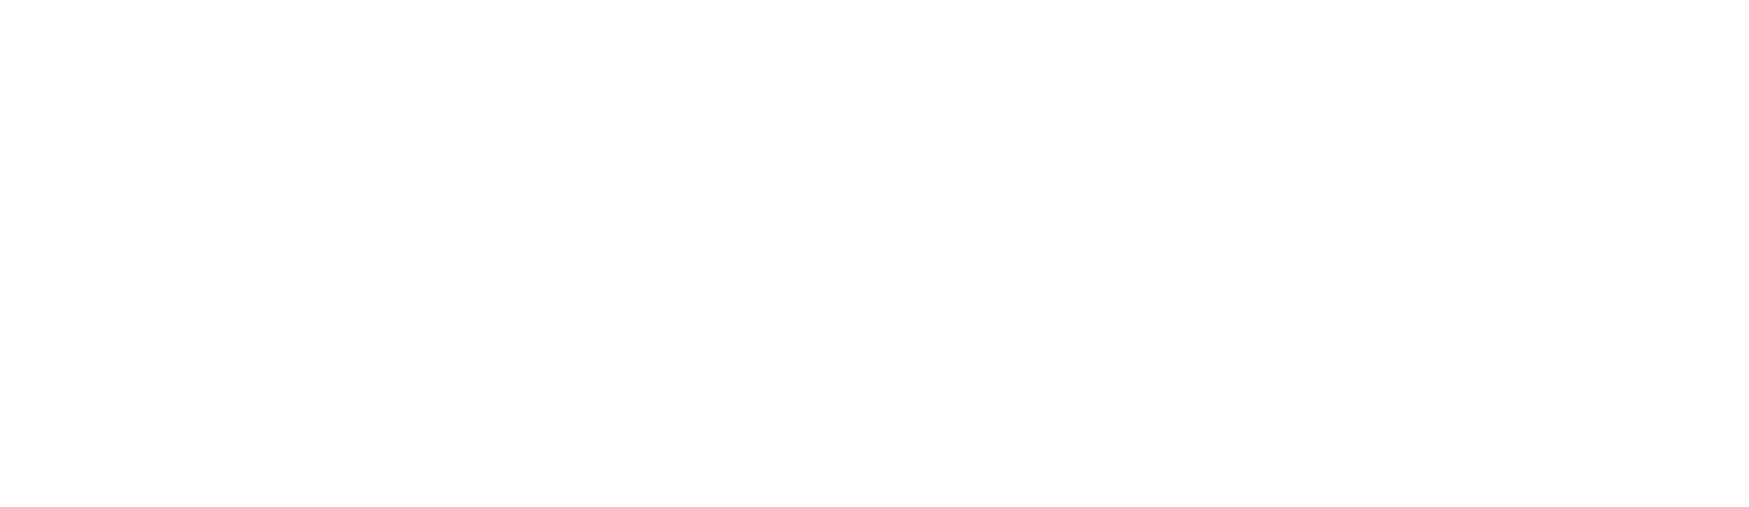 Star Wipers